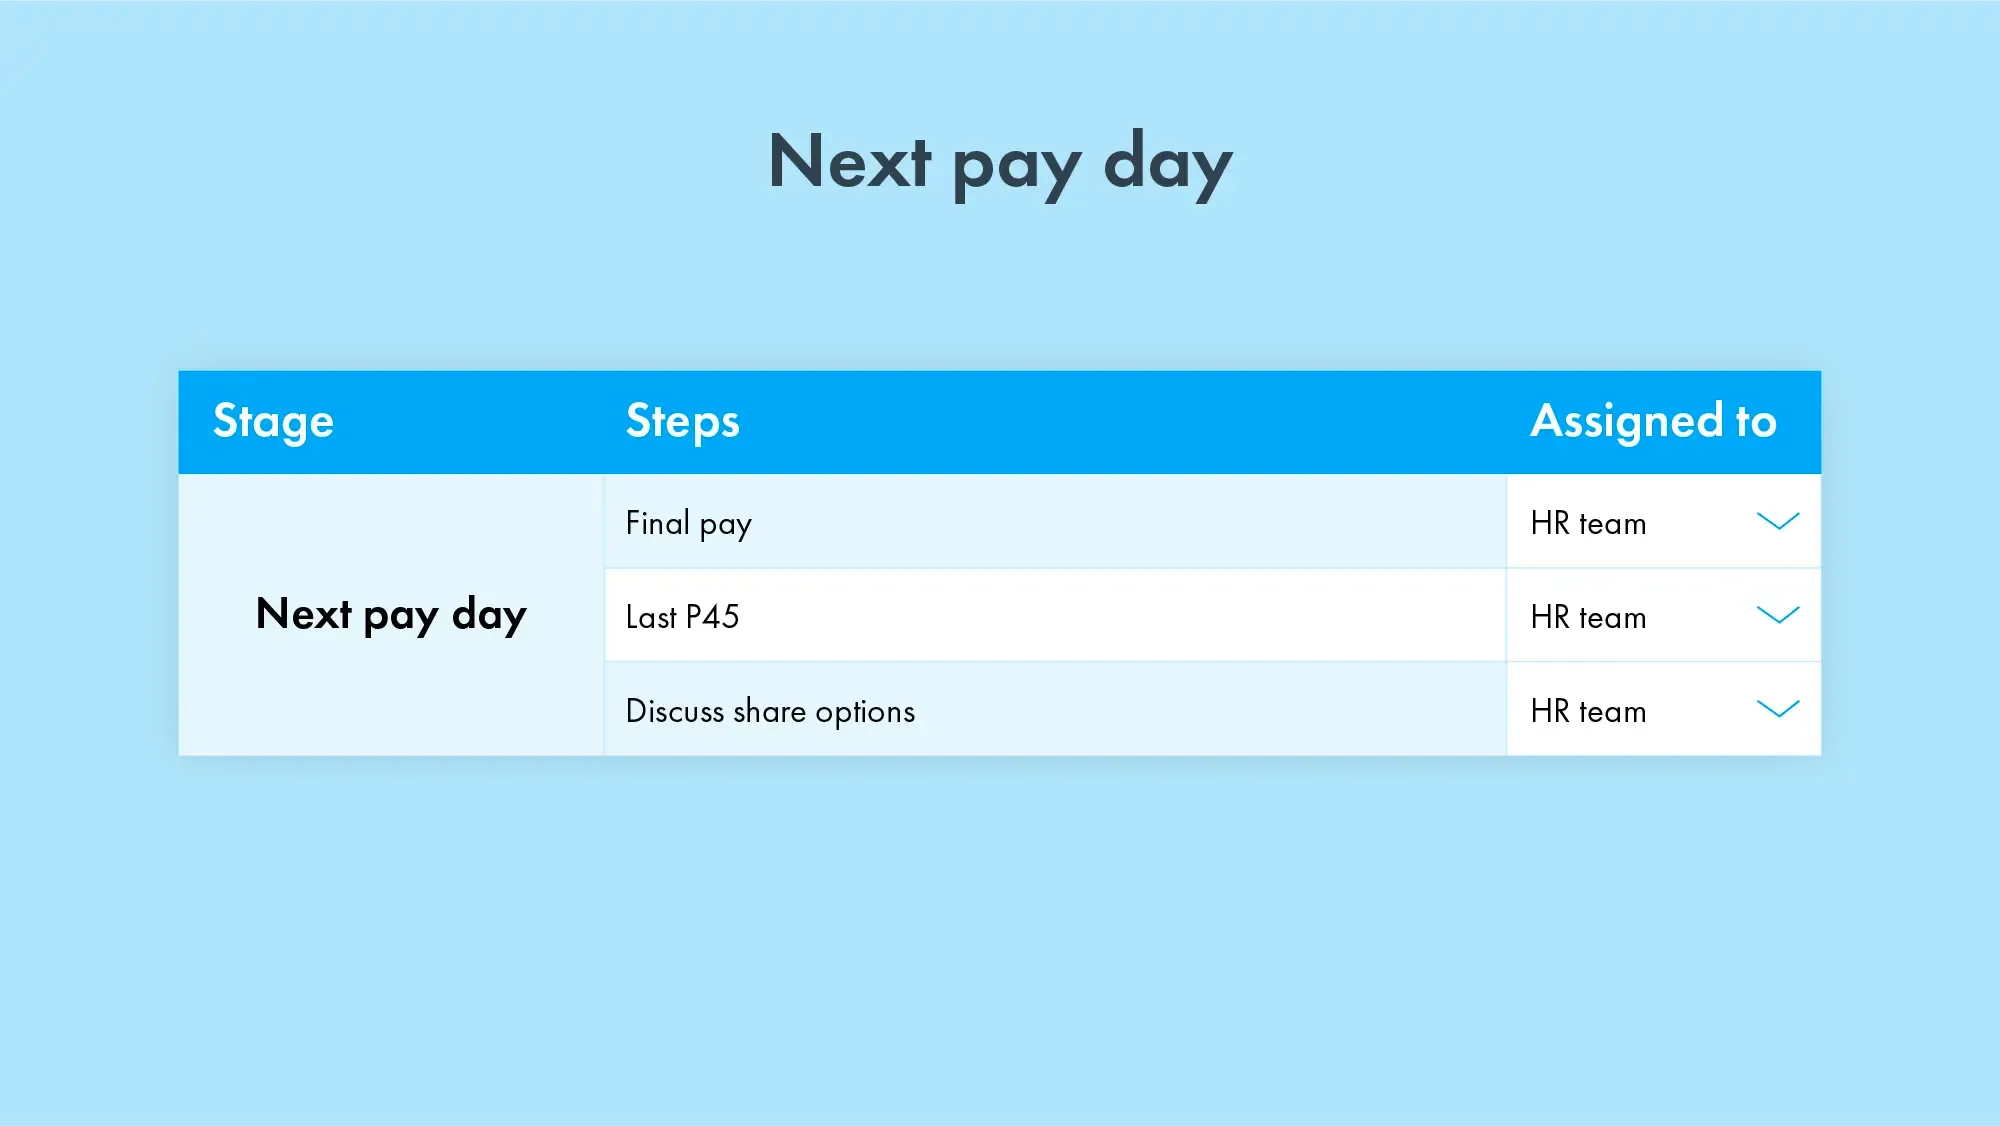 Summary of offboarding checklist for the next pay day after someone leaves